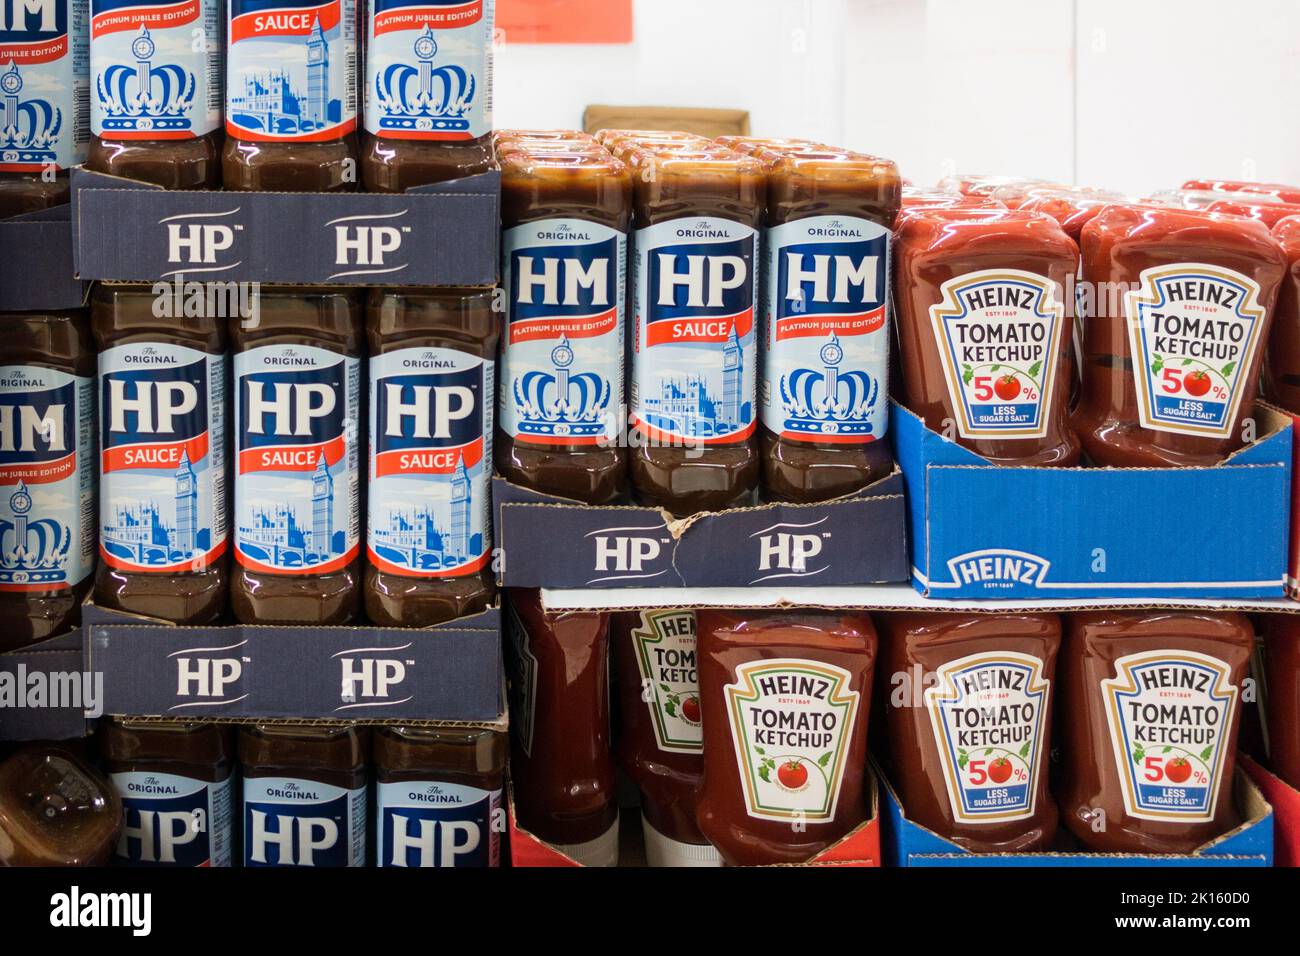 HP sauce and Heinz Tomato Ketchup on store floor Stock Photo